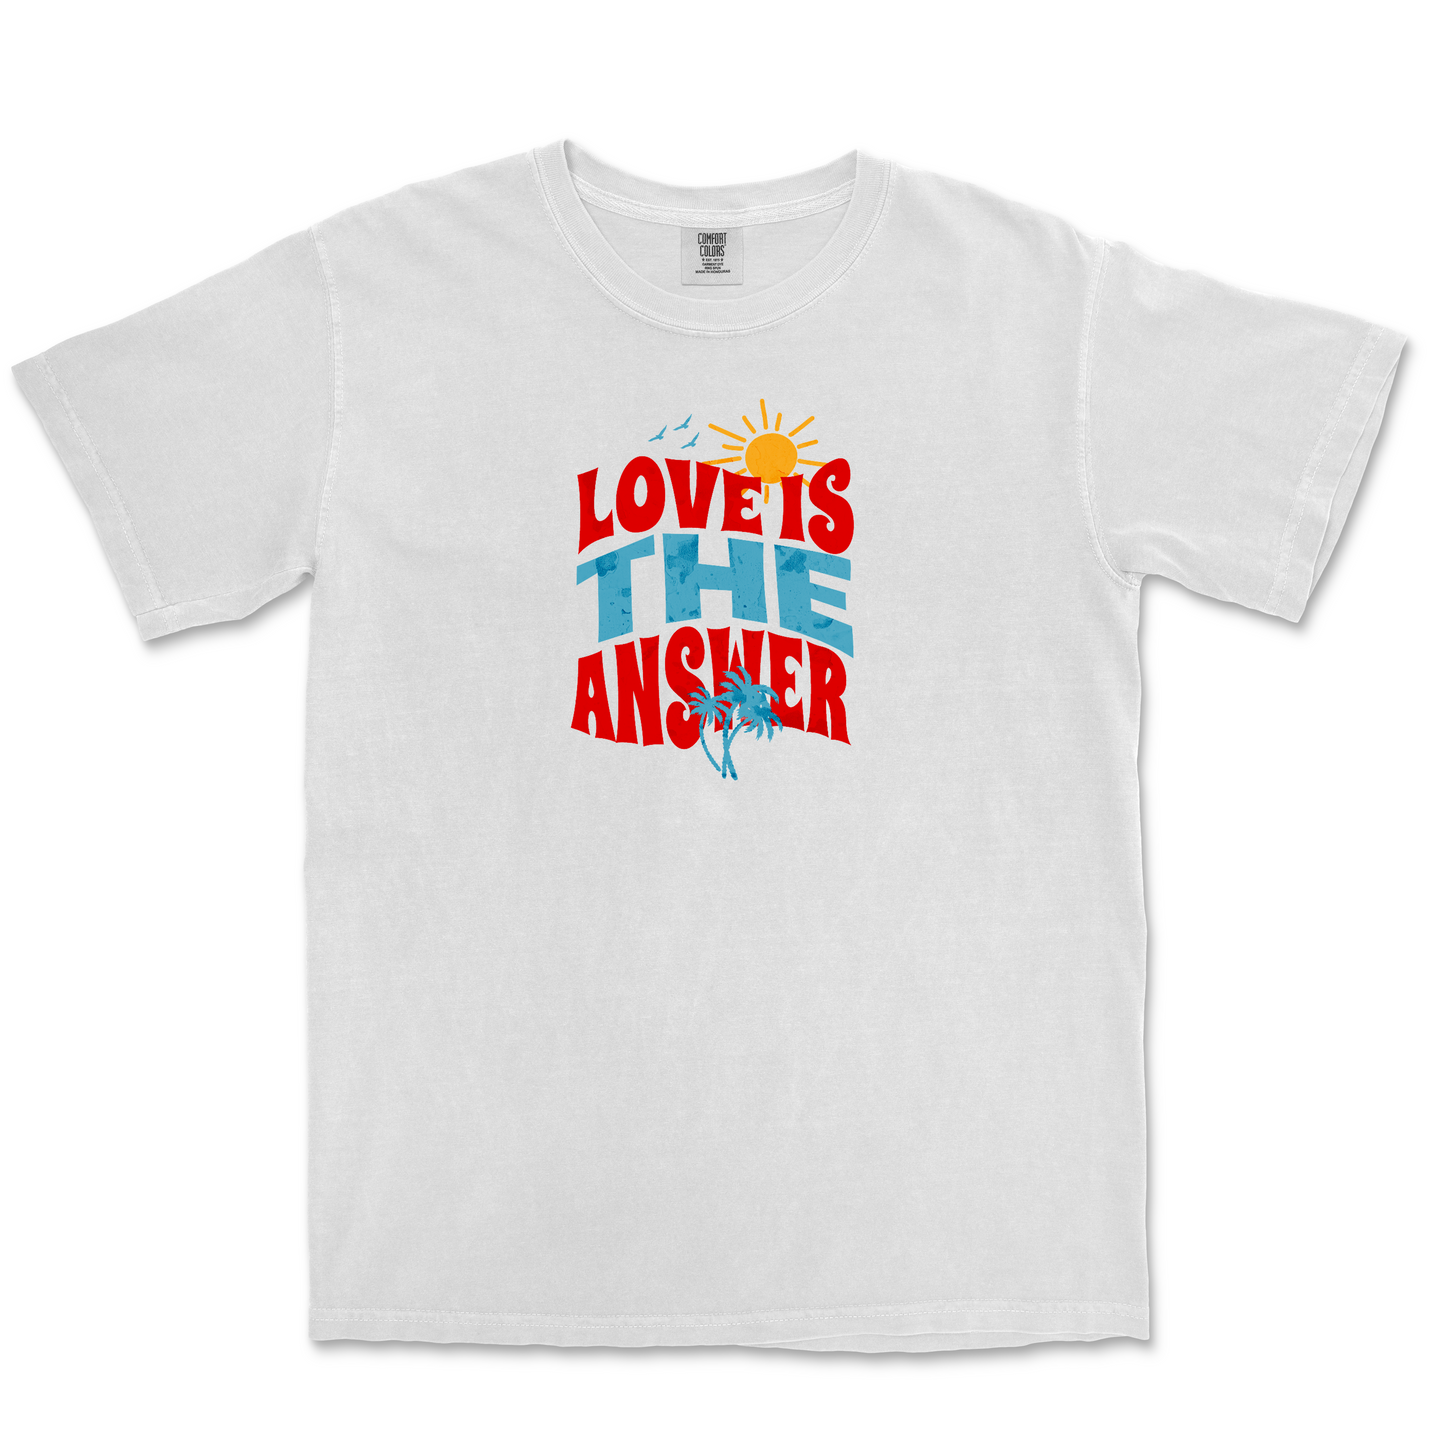 Salvation South - The Love Is The Answer T-shirt